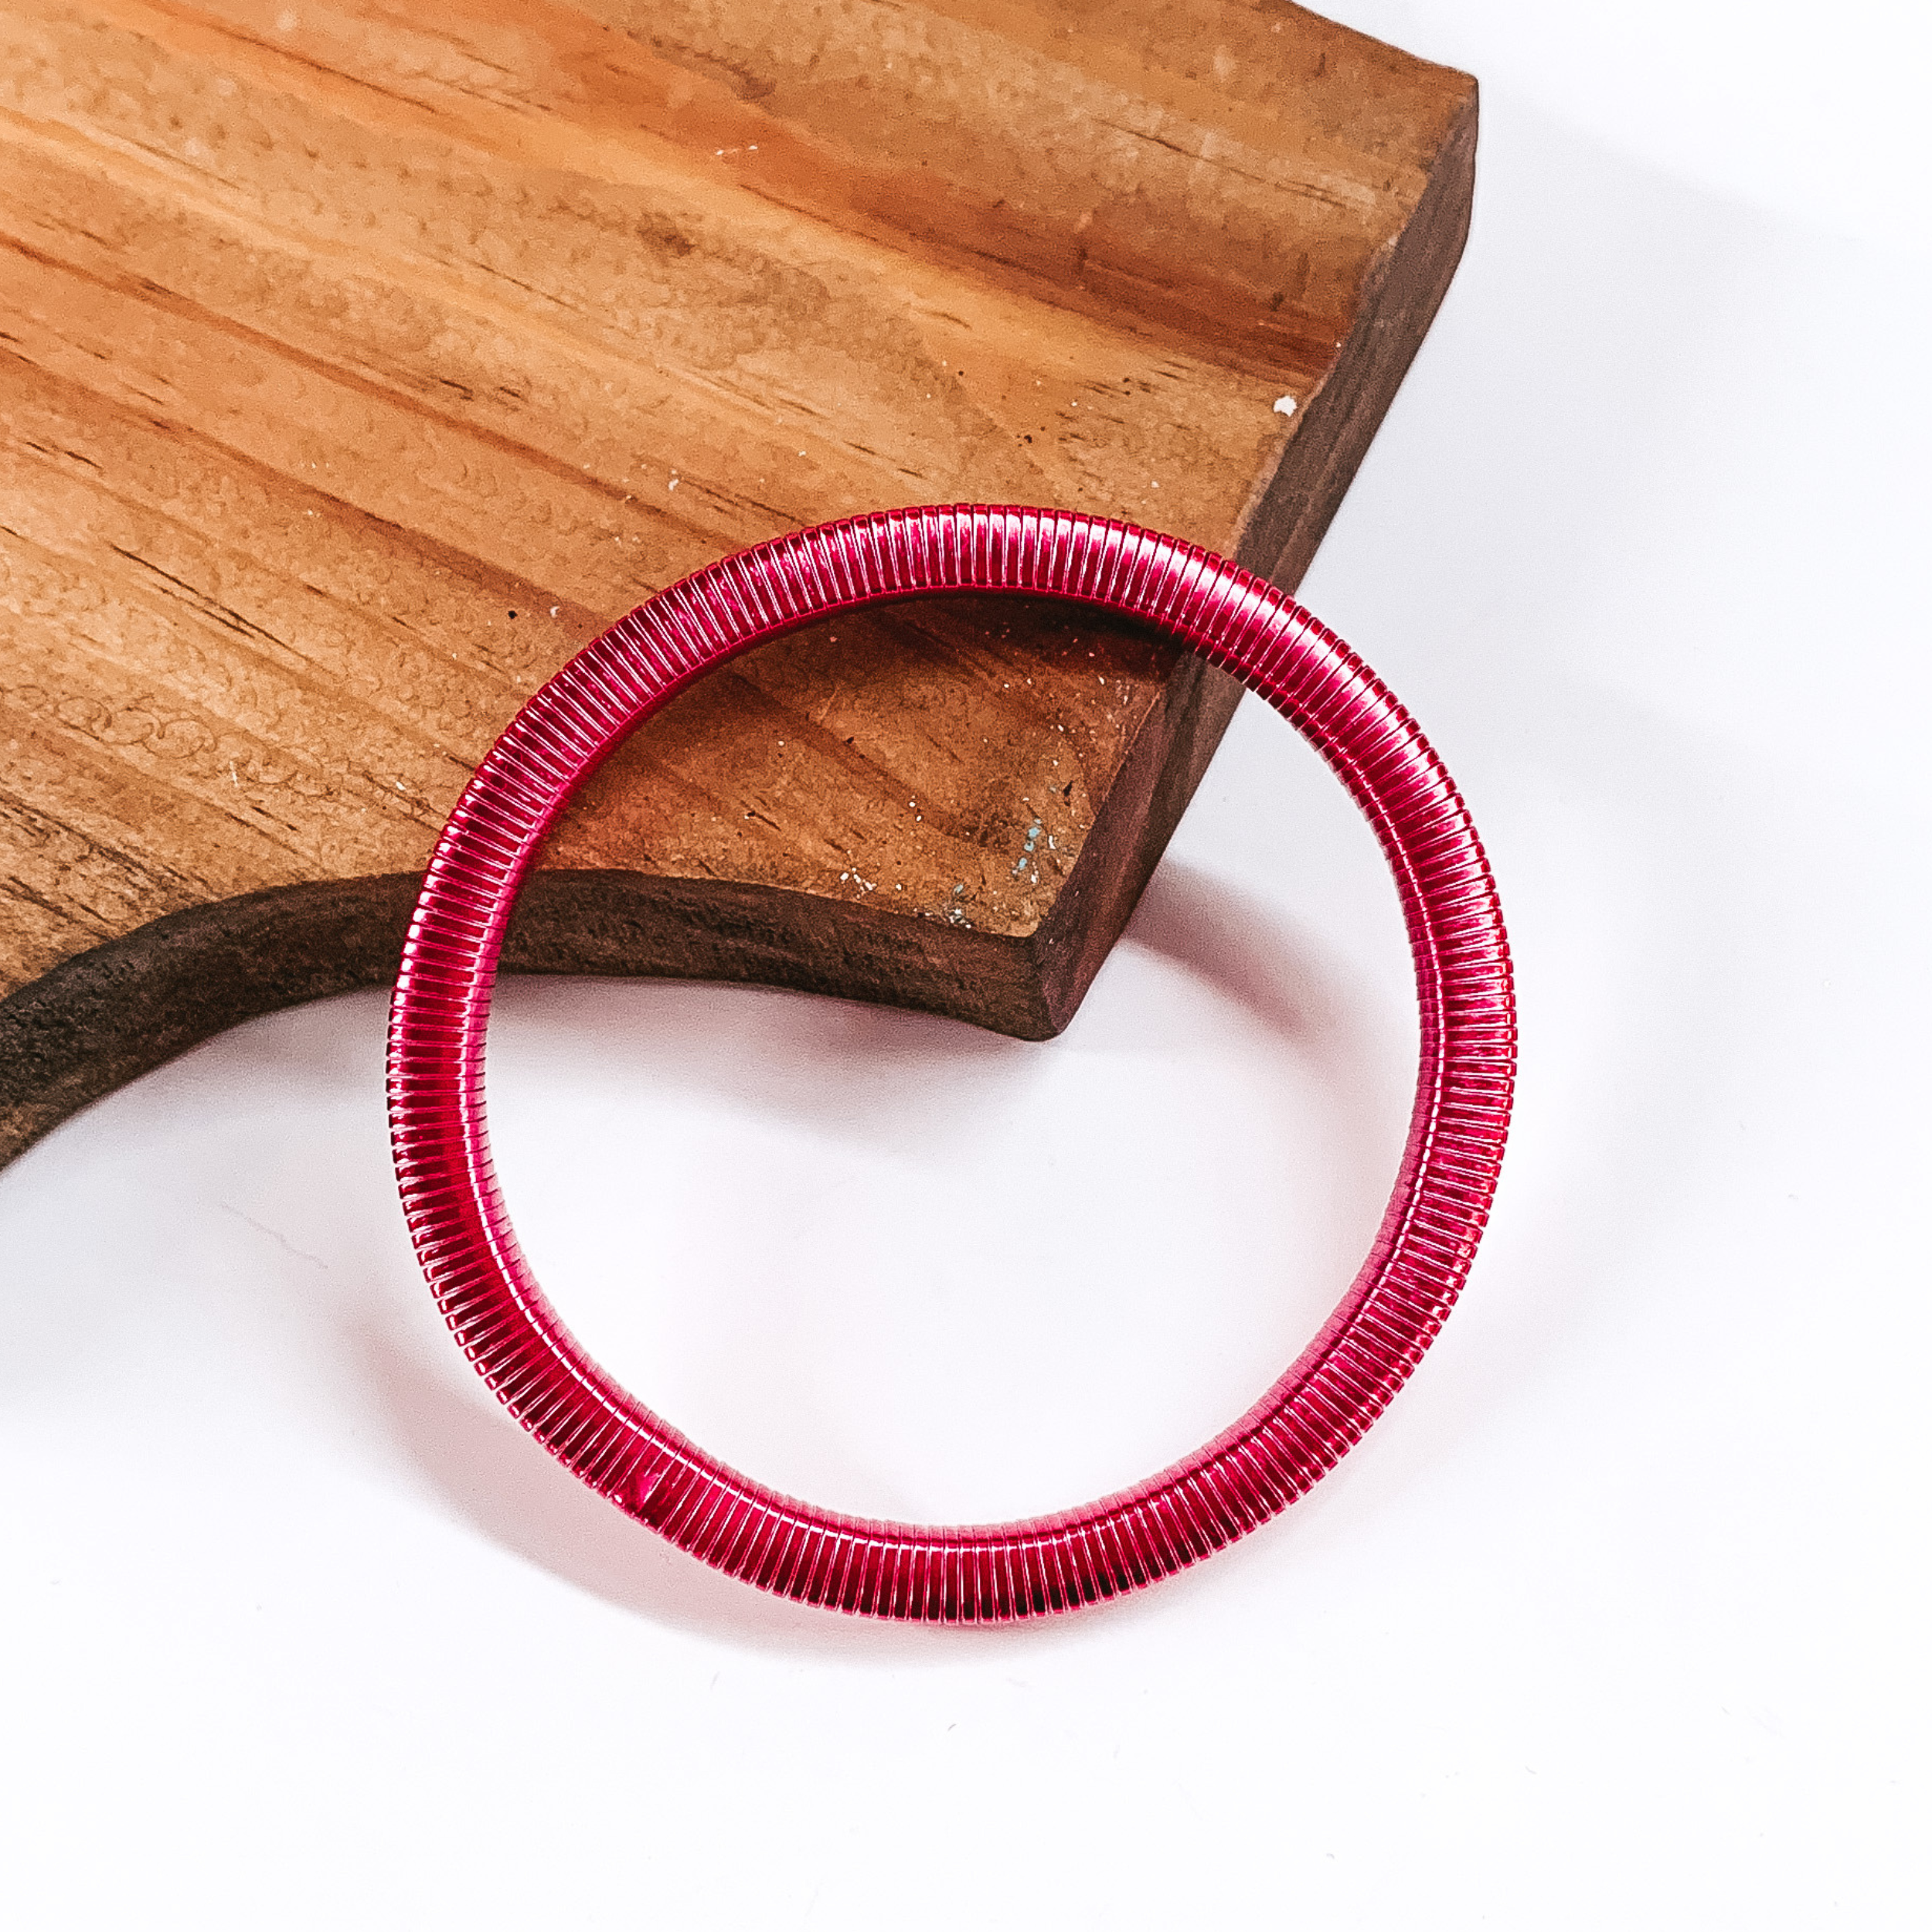 This is a hot pink Herringbone bracelet. It is partially laying on a wooden board, on a white background.